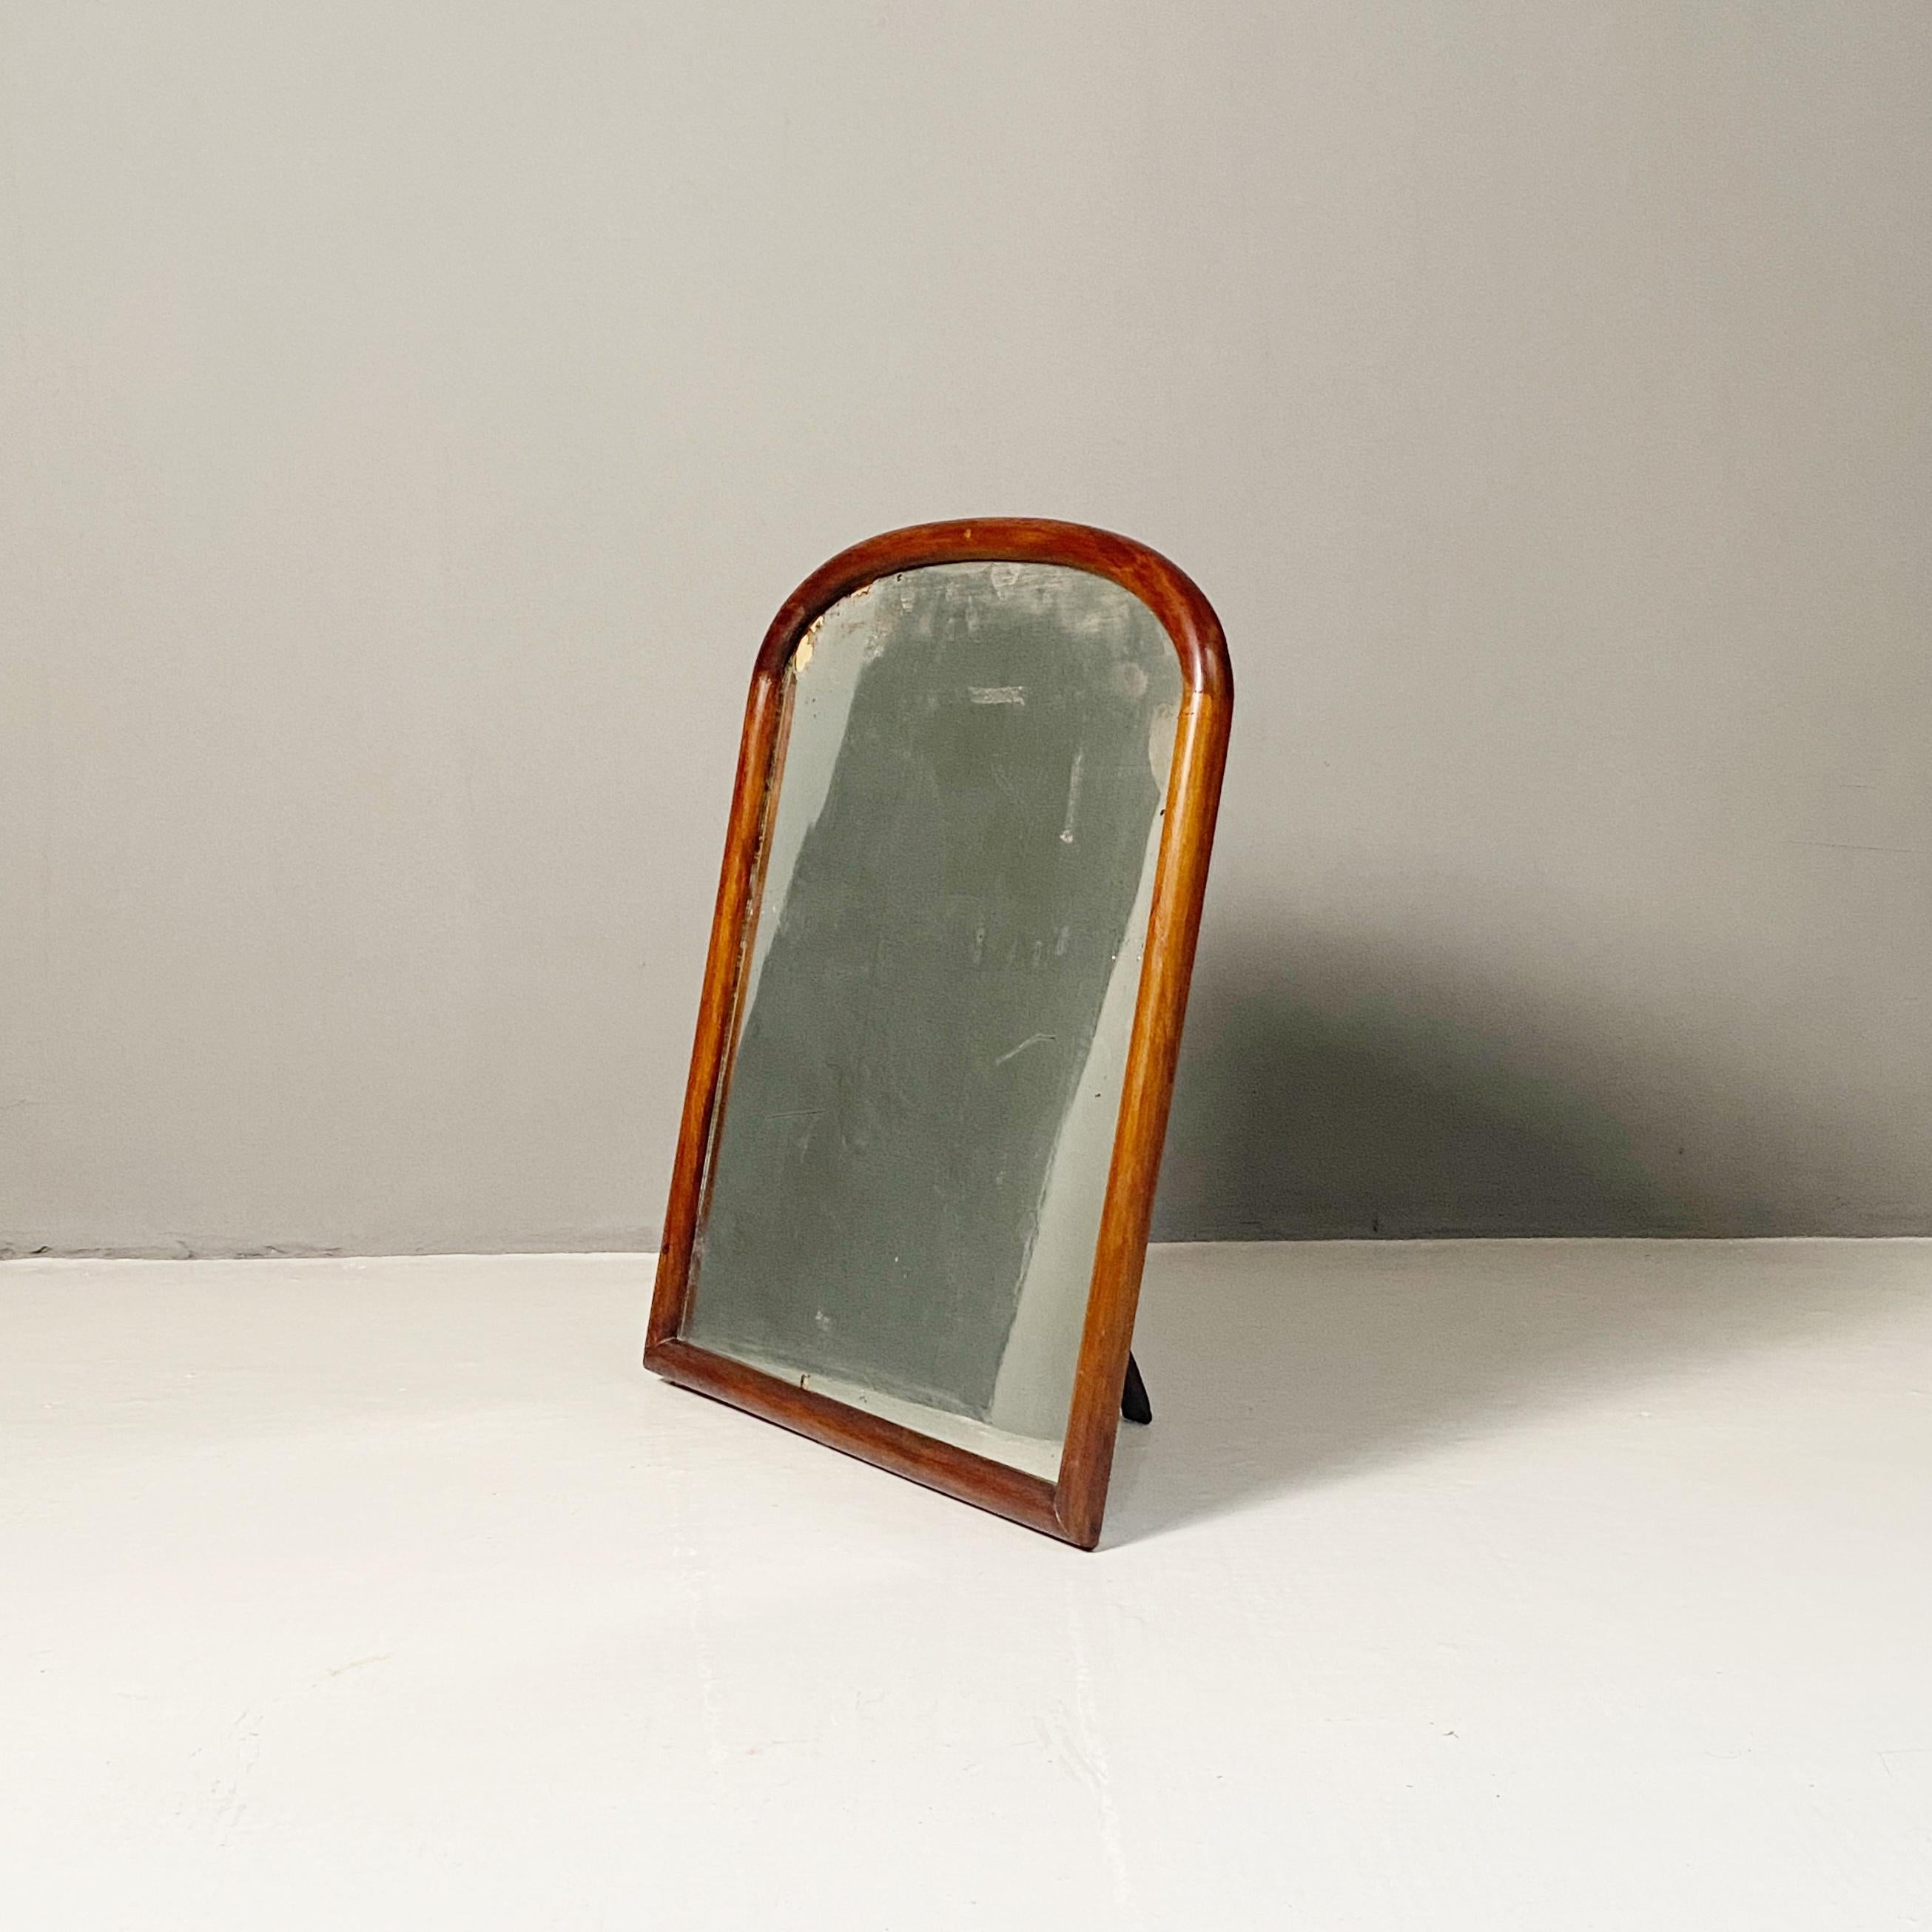 Italian 18th Century Wooden Table Mirror with Mercury Glass, 1700s For Sale 3